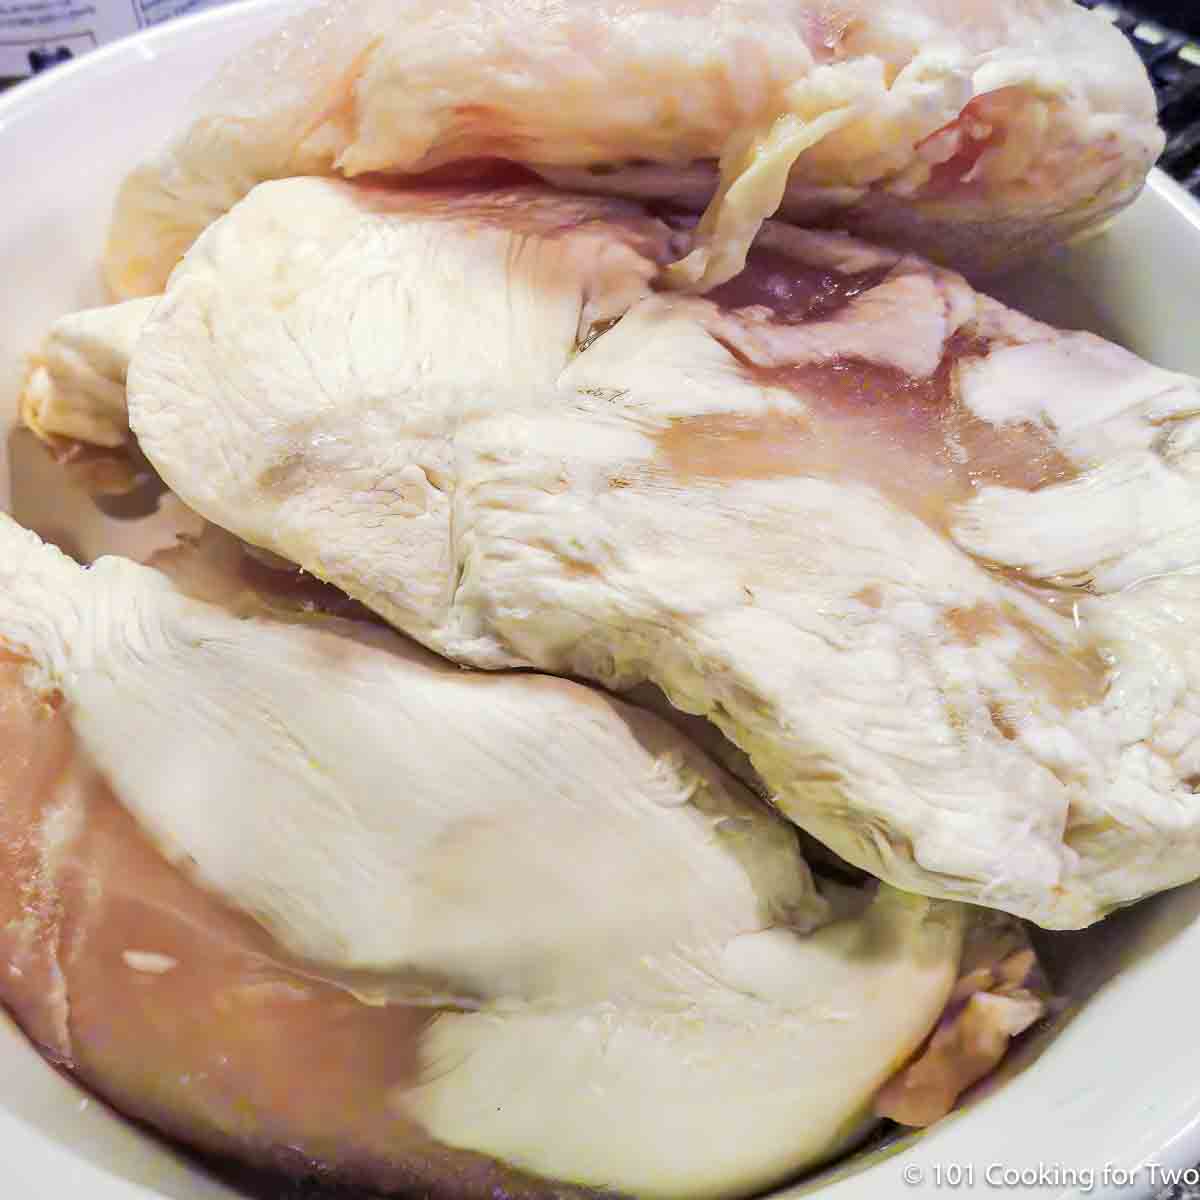 https://www.101cookingfortwo.com/wp-content/uploads/2023/02/freezer-burnt-chicken-on-a-white-plate.jpg